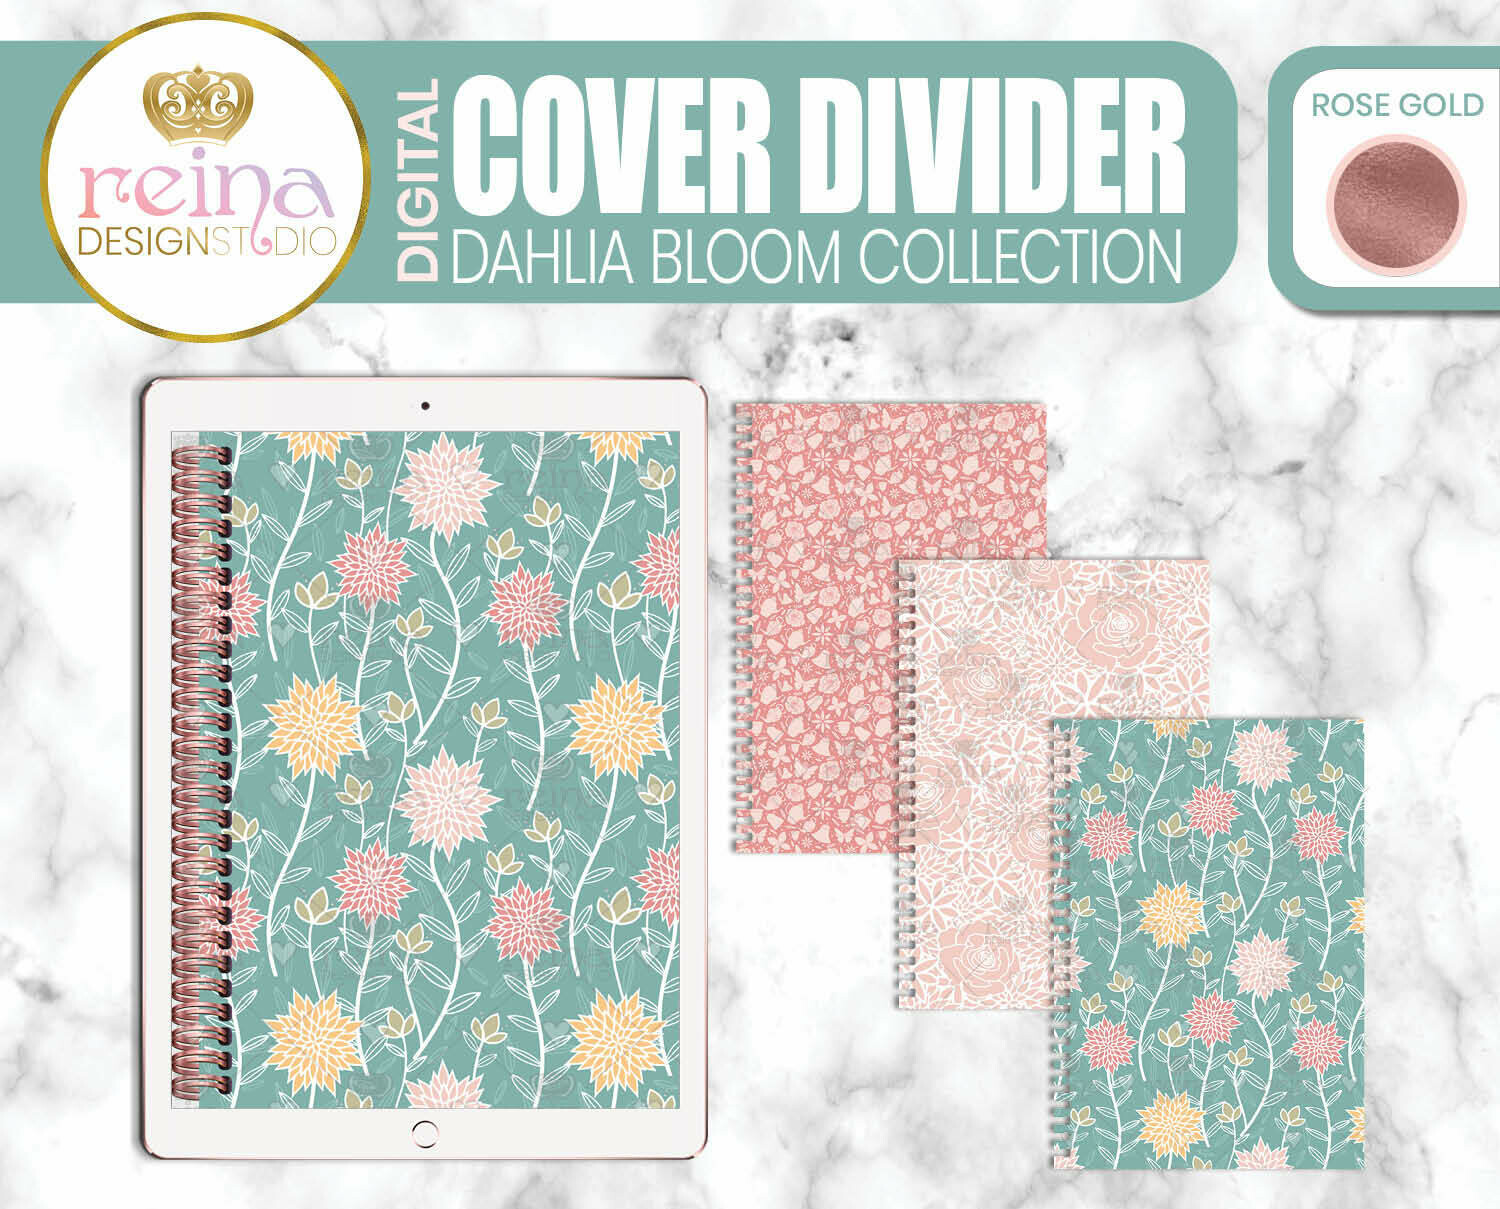 Interchangeable Digital Planner Cover and Dividers | Dahlia Bloom, Rose Gold